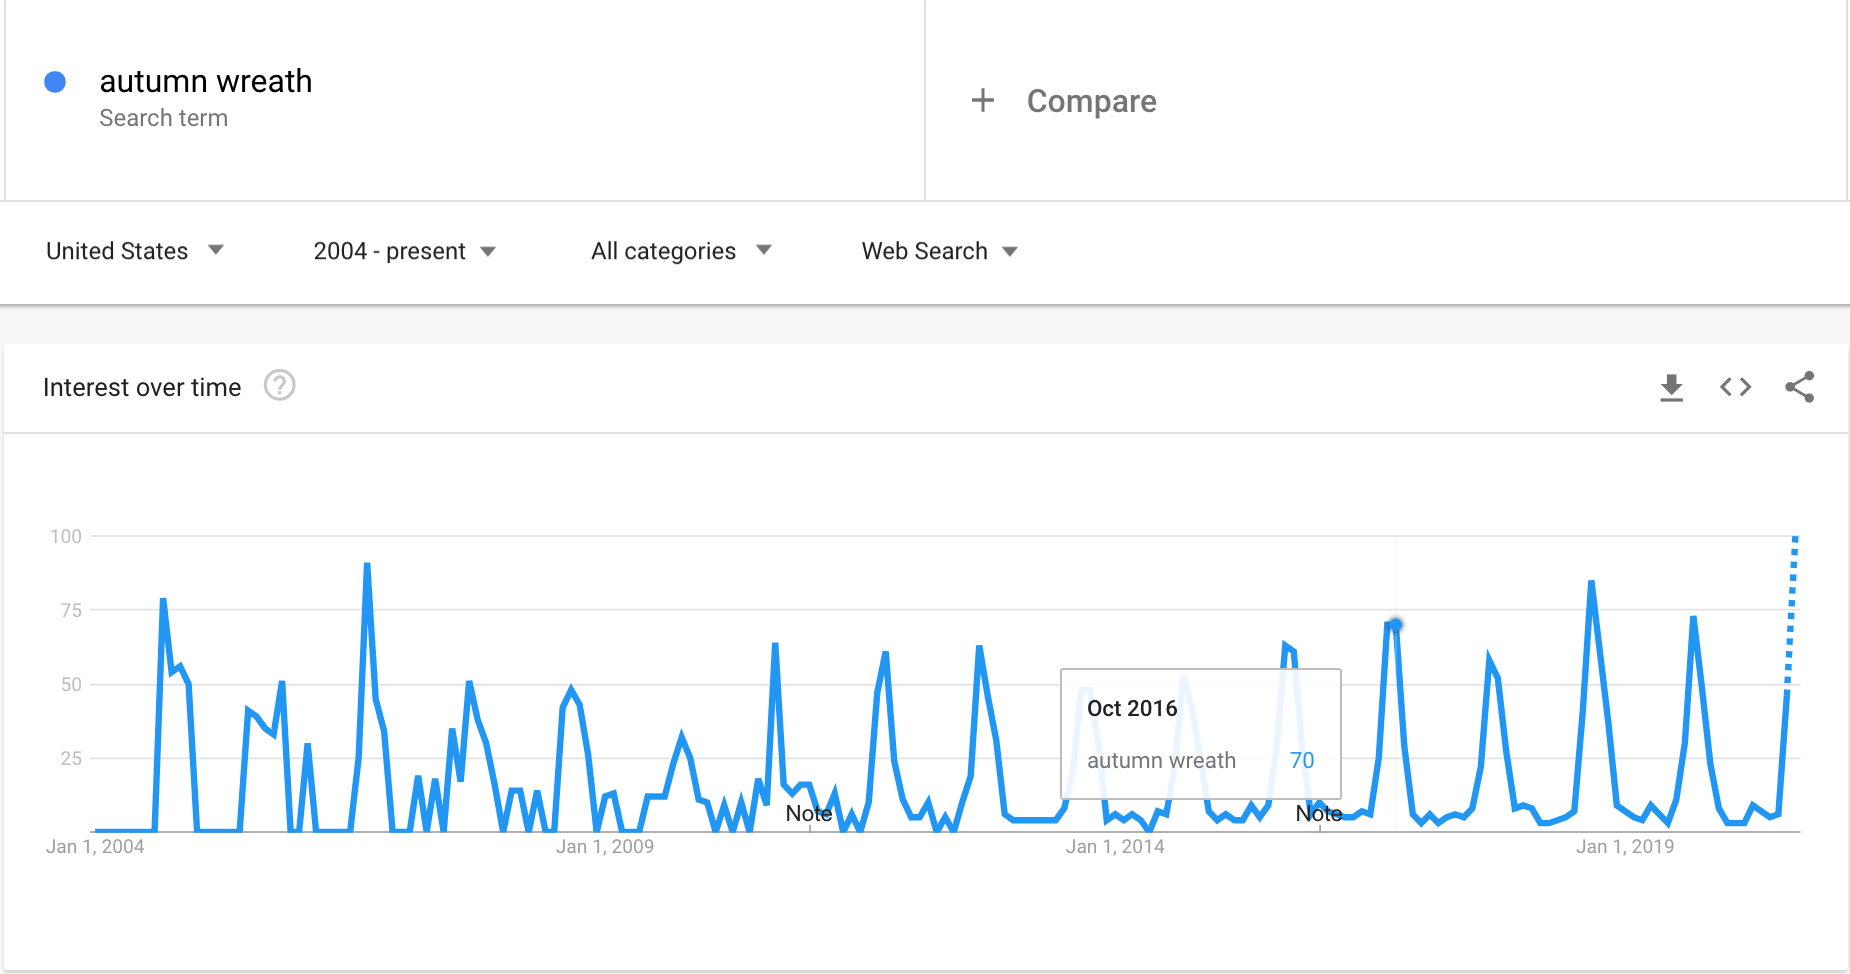 Google Trends graph showing the interest in autumn wreaths